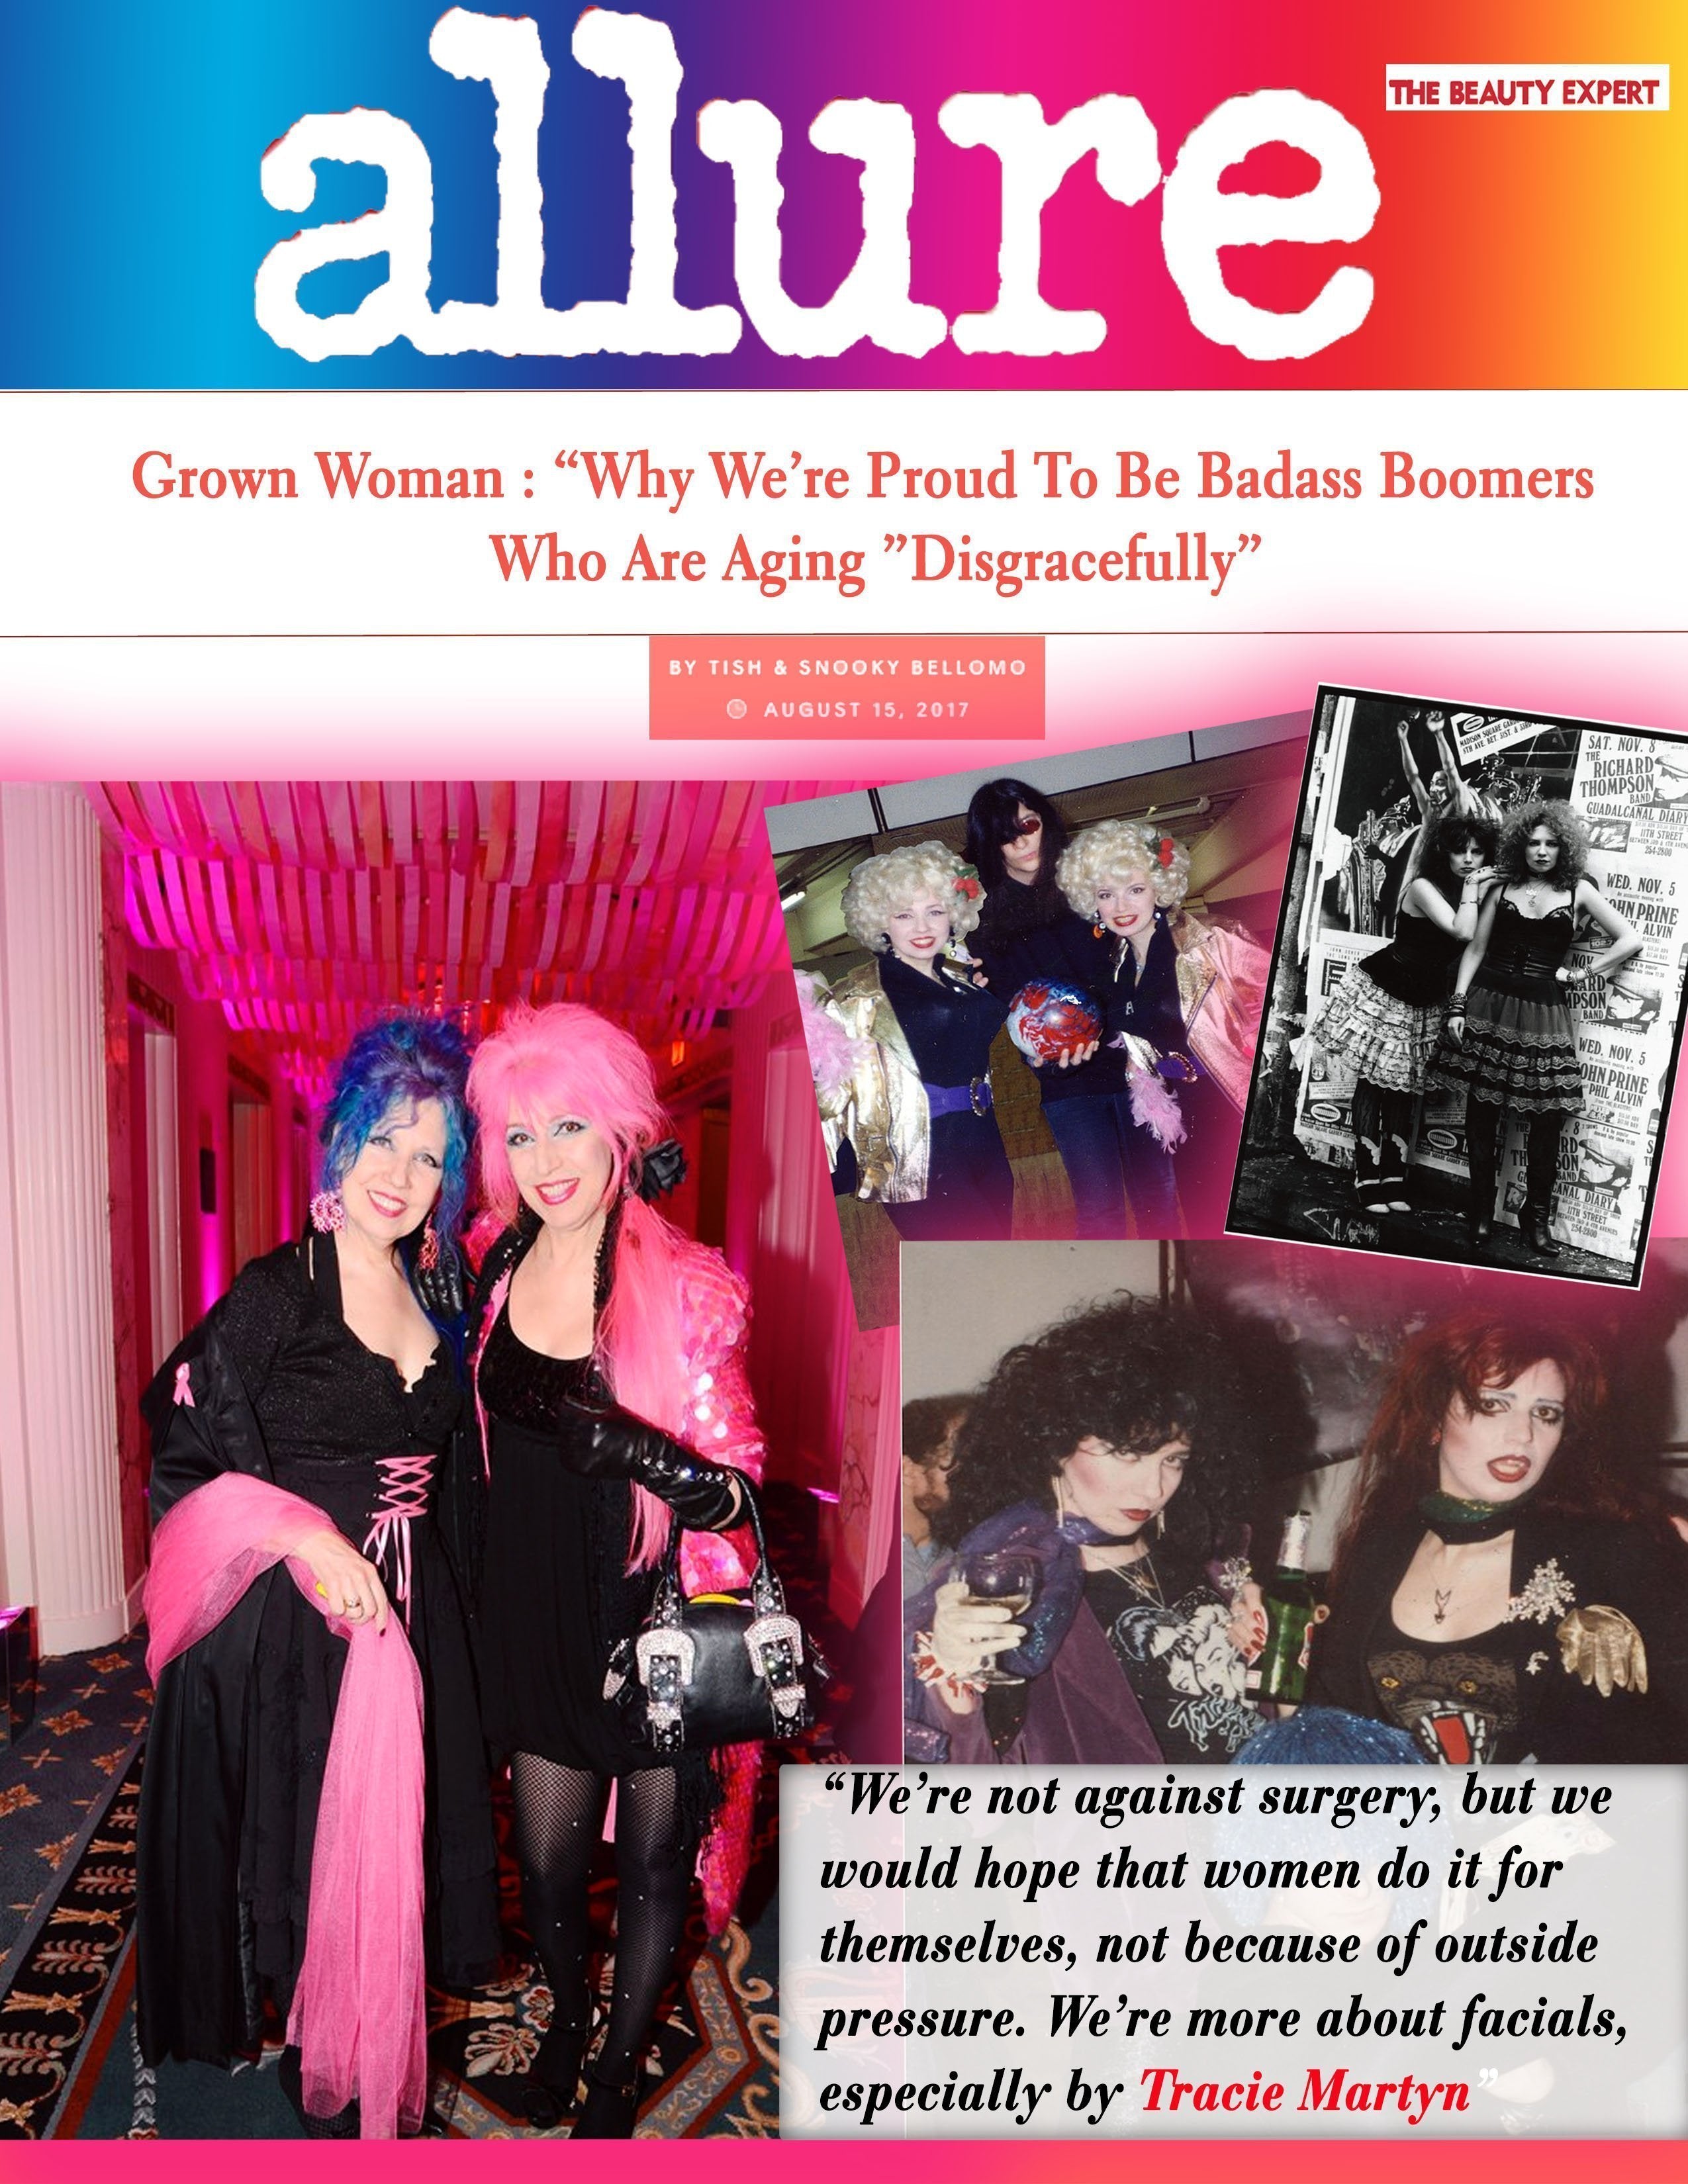 Allure: Manic Panic CEO's on Tracie Martyn Facials